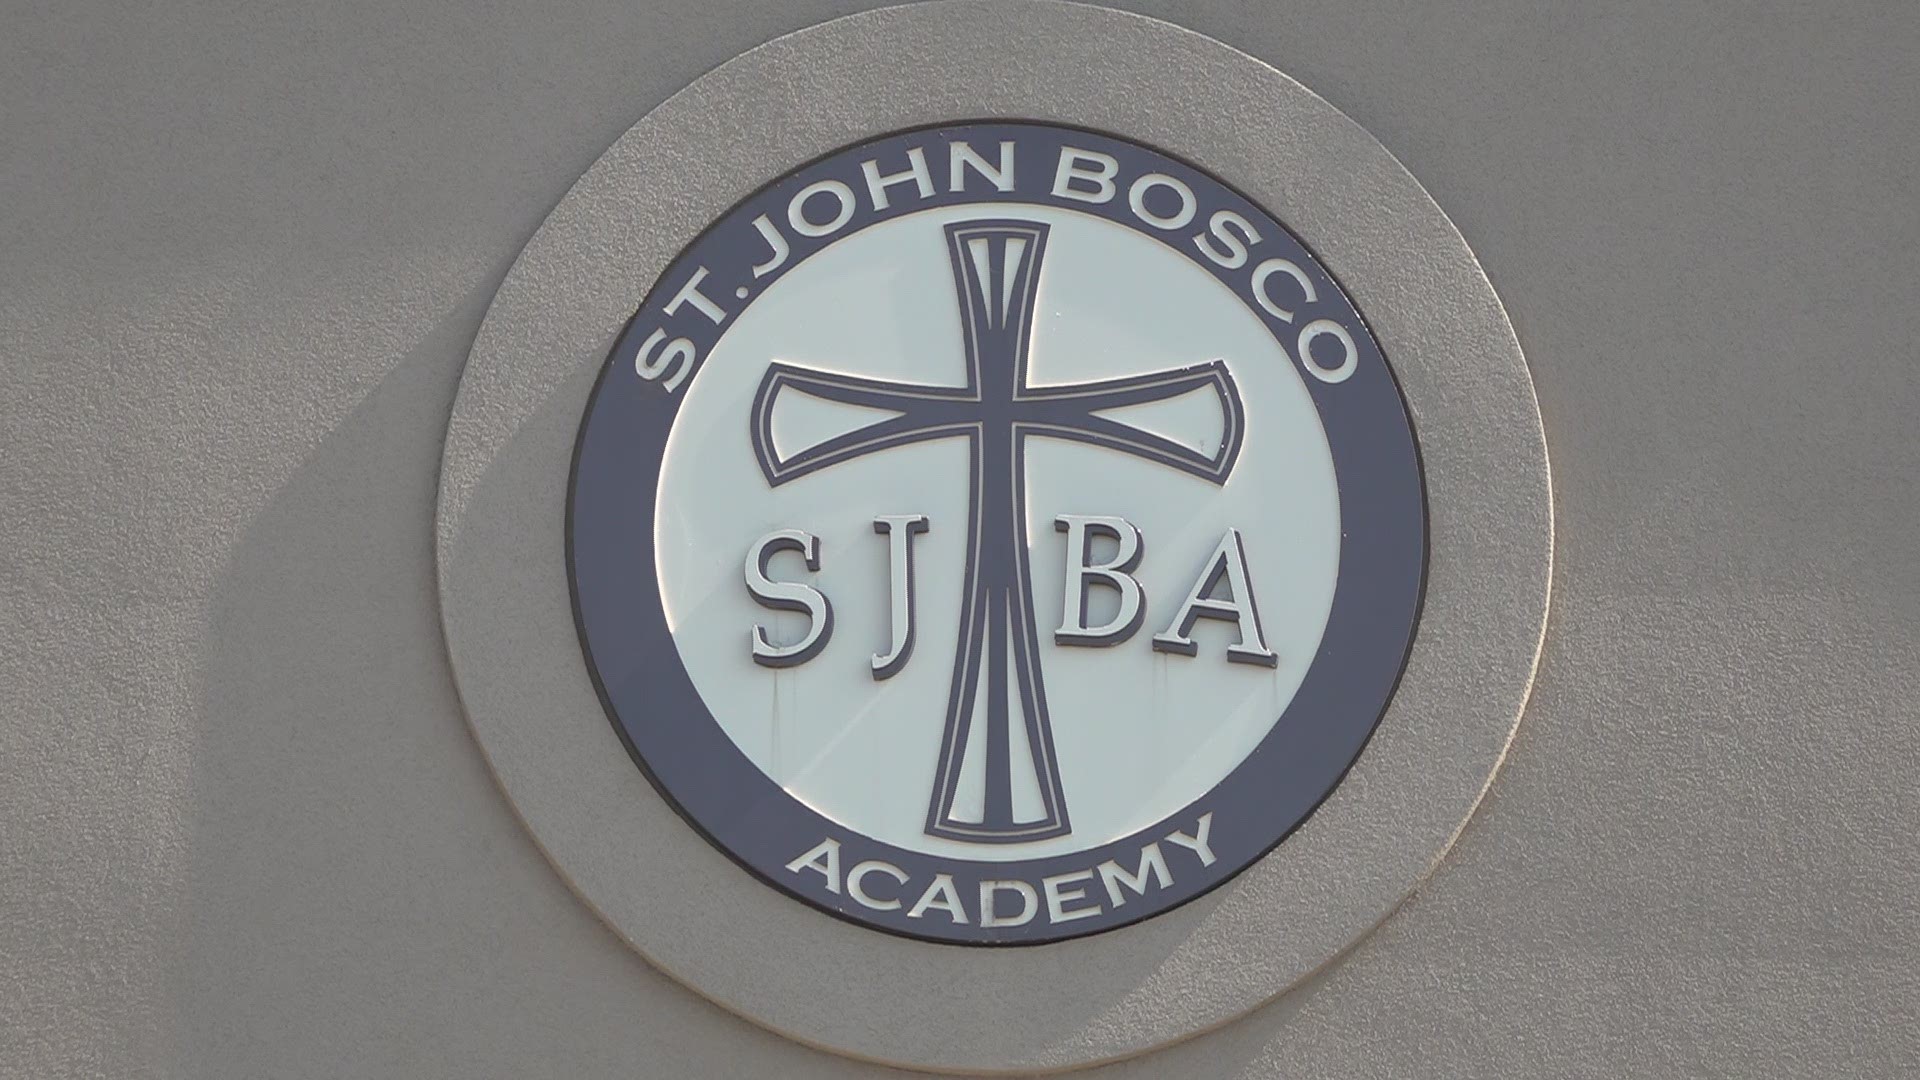 The students and staff at St. John Bosco Academy are celebrating the success of the school’s soccer team which recently became a state champ.